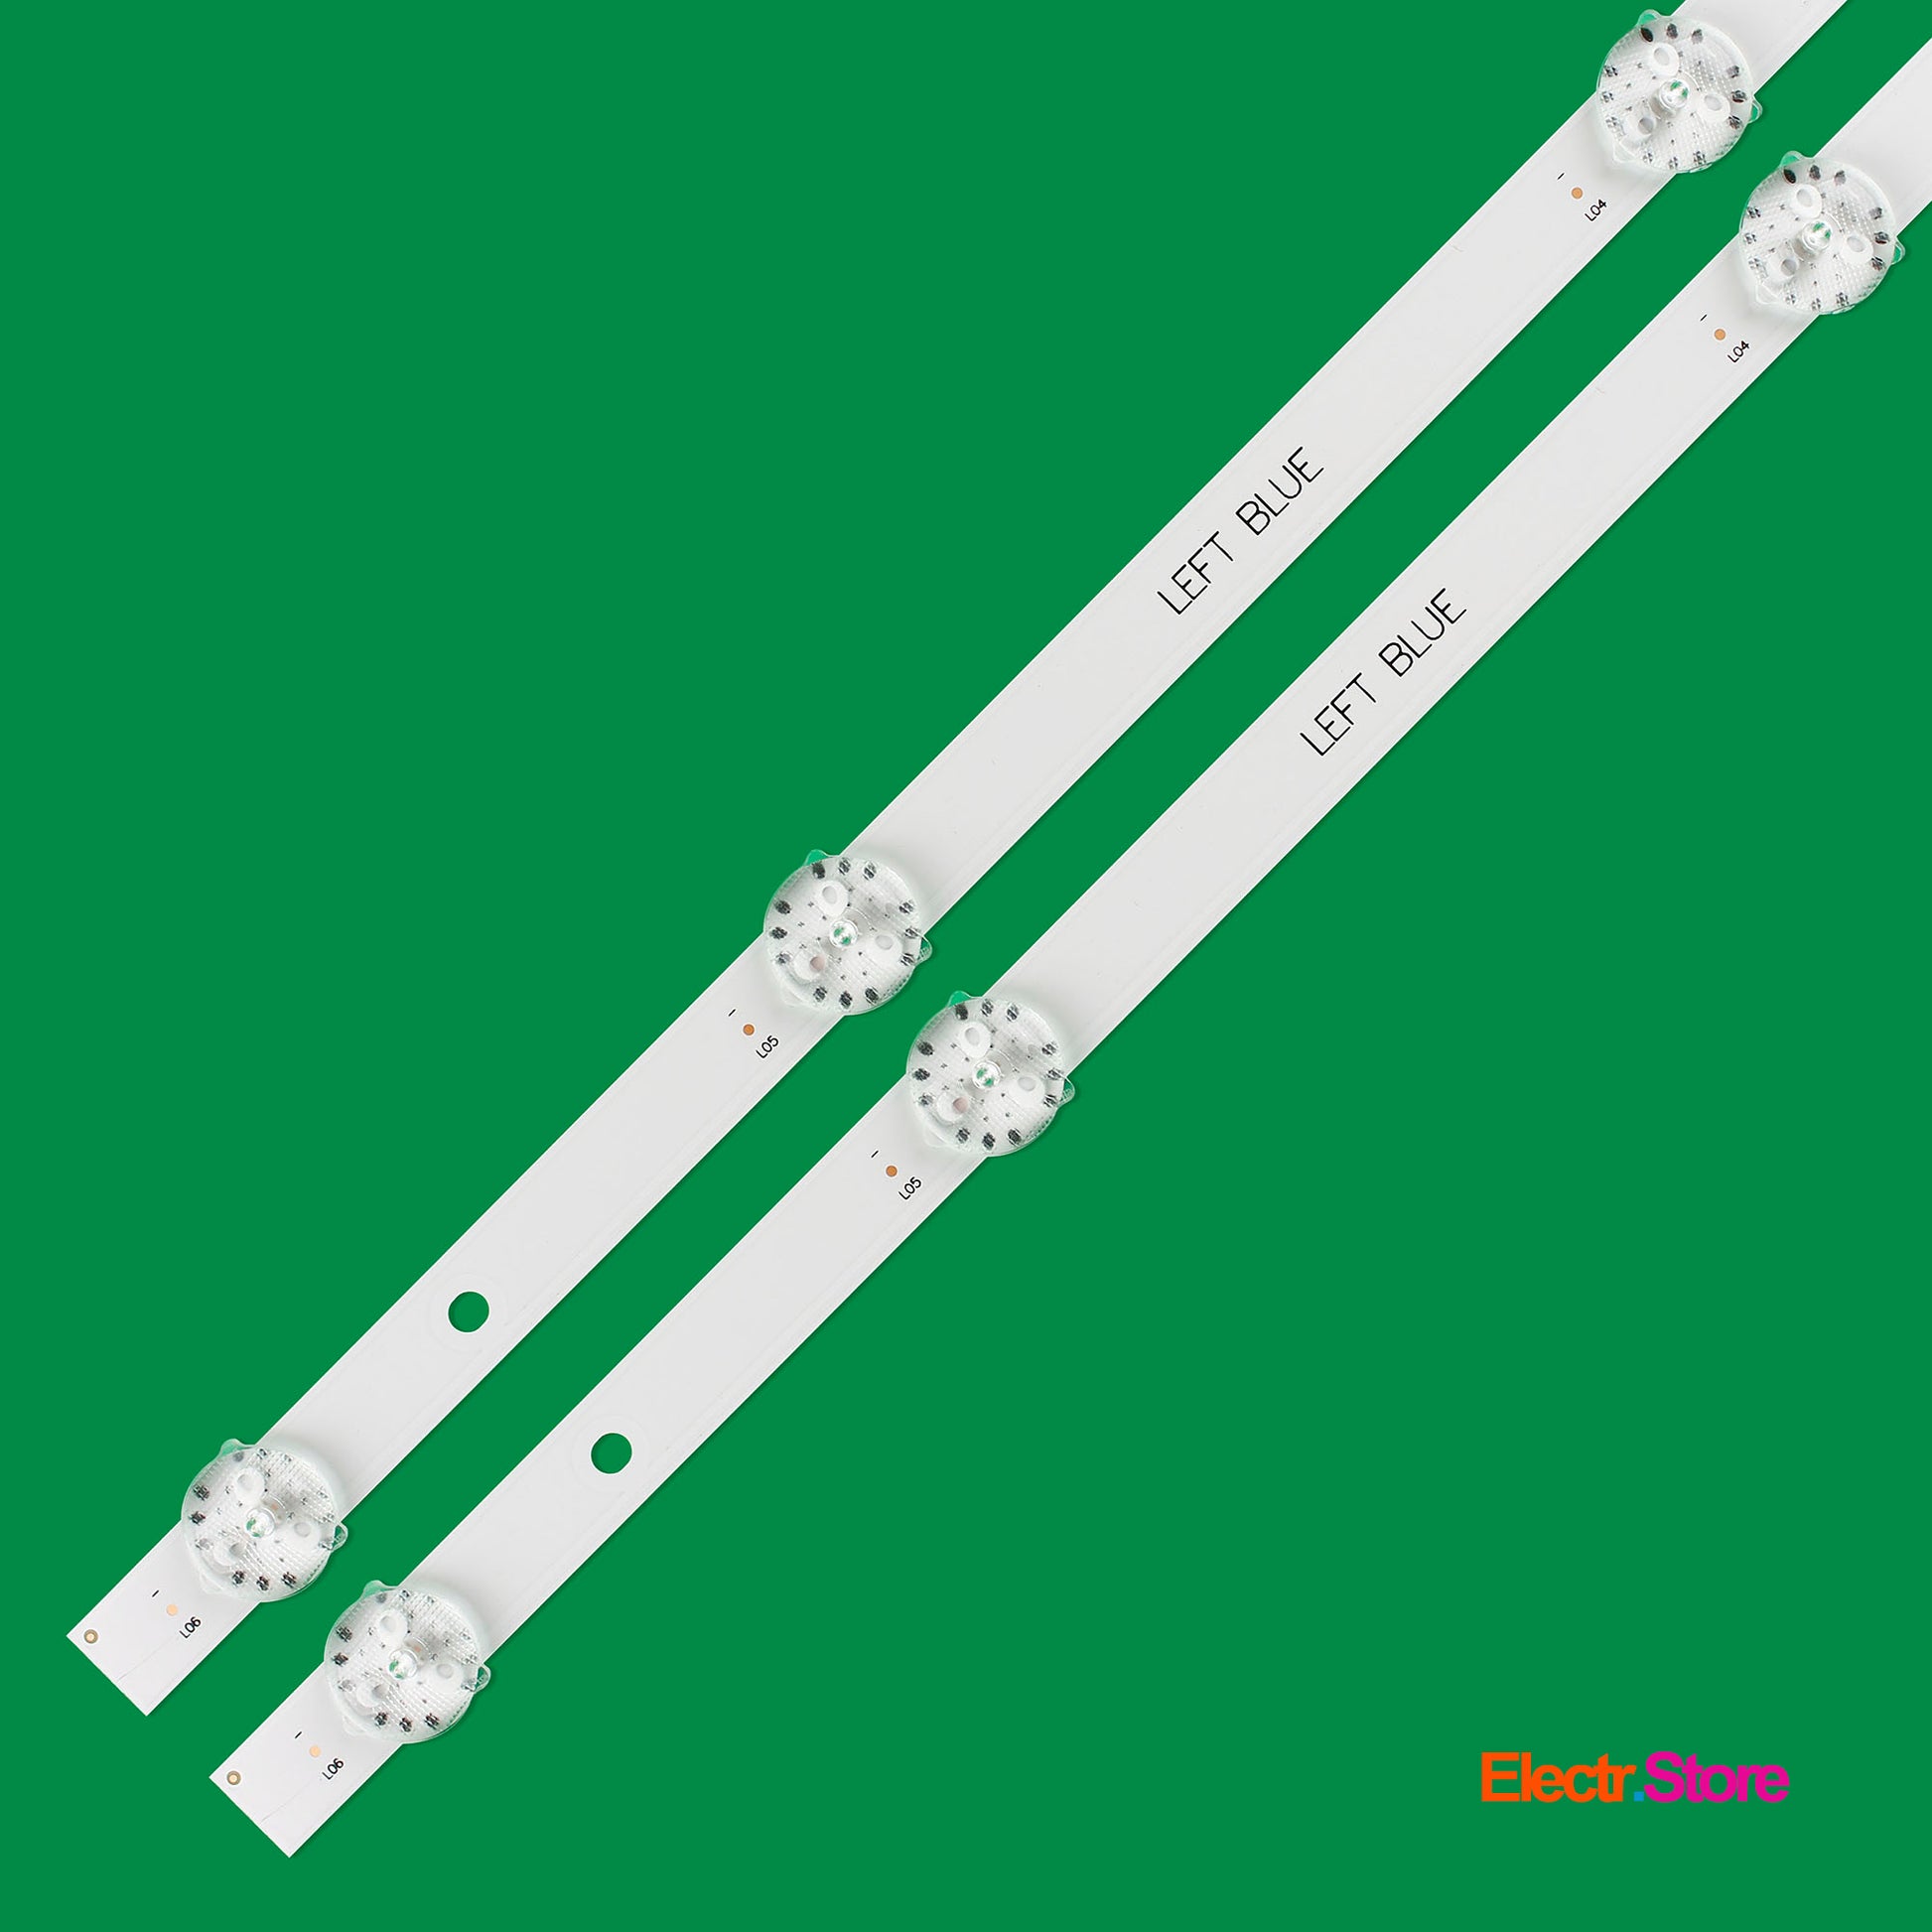 LED Backlight Strip Kits, JL.D32061330-057GS-M, JL.D32061330-004AS-M, 4C-LB320T-JF3/JF4 (2 pcs/kit), for TV 32" 32" JL.D32061330-057GS-M LED Backlights Multi Others TCL THOMSON Whaley Electr.Store